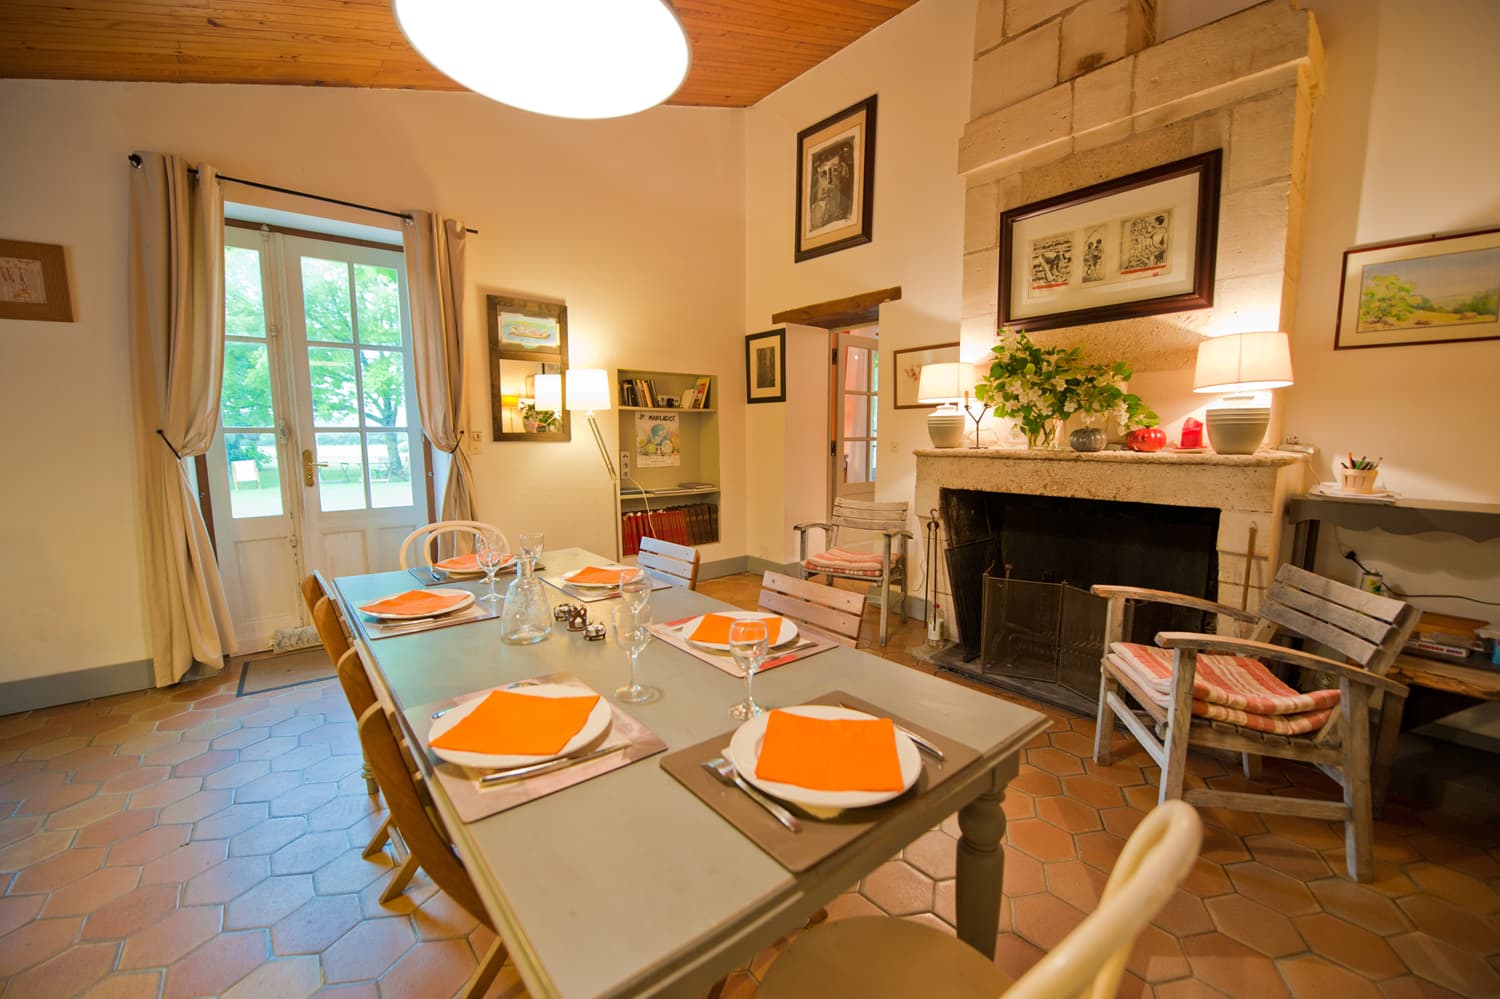 Dining room in South West France rental home